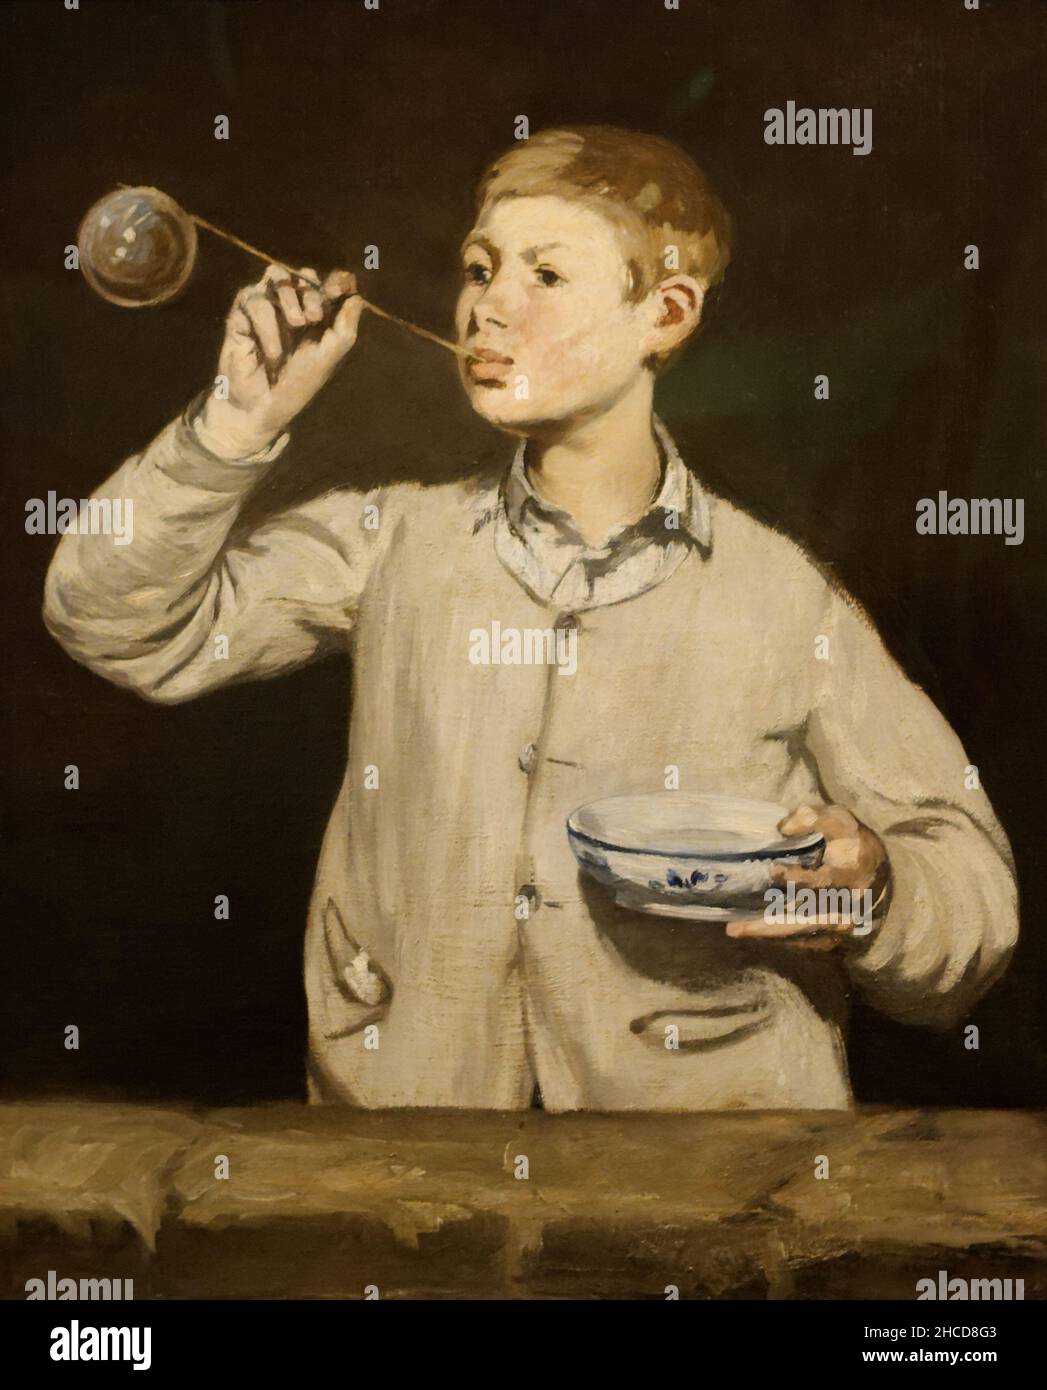 Boy Blowing Bubbles (also known as The Soap Bubbles; French: Les Bulles de savon) by Édouard Manet,. It shows Léon Koelin-Leenhoff, the illegitimate son (possibly fathered by Manet) of Manet's future wife, Suzanne Leenhoff. Bubbles are a symbol of the brevity of life. Stock Photo